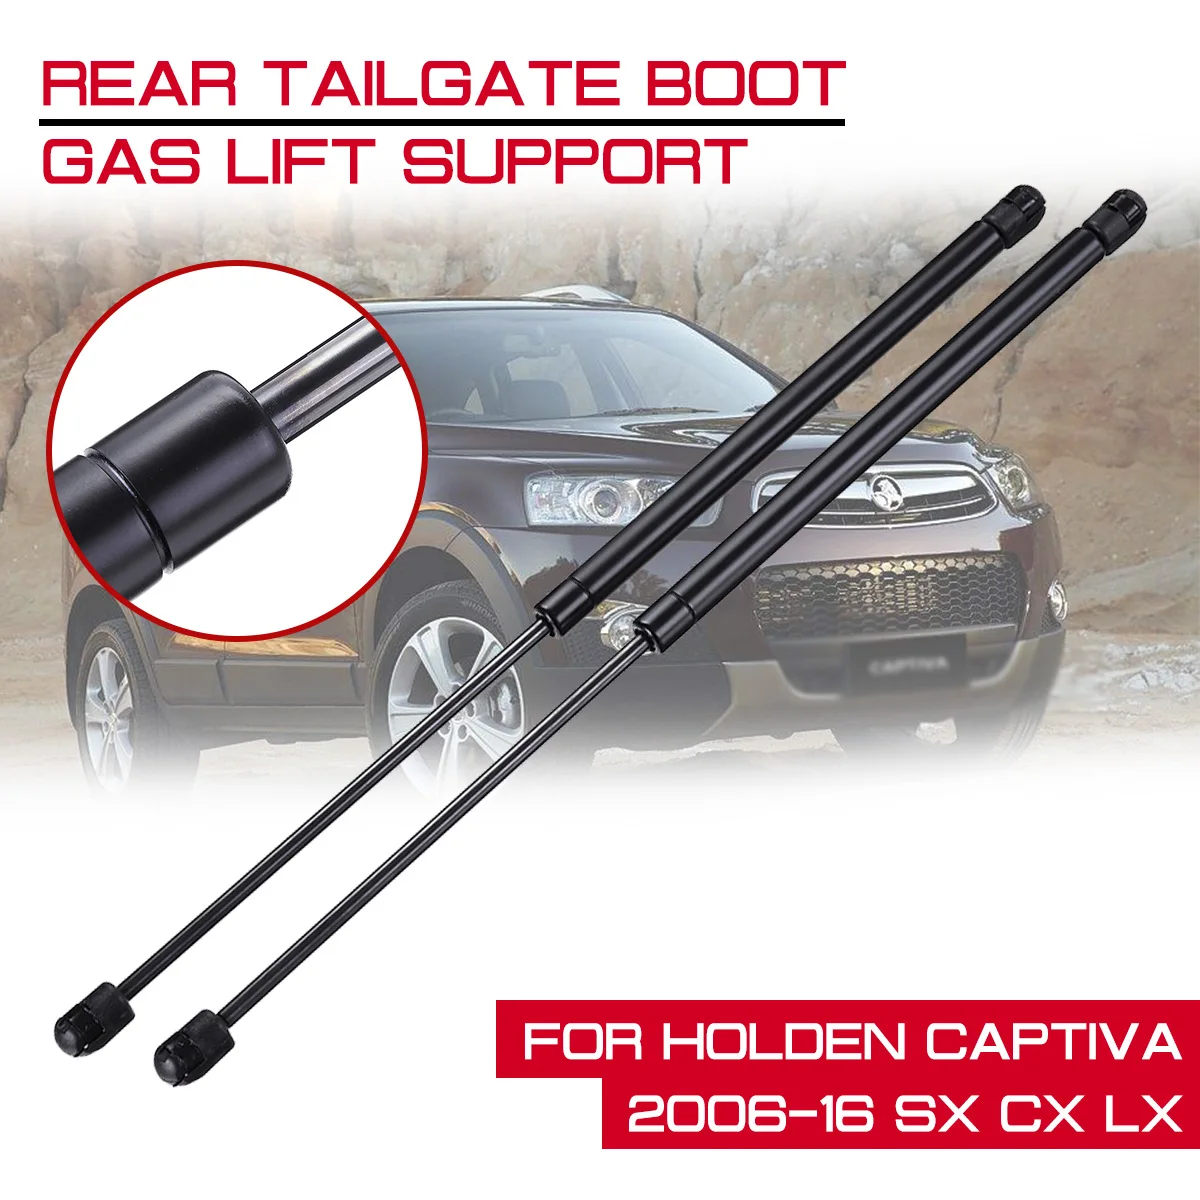 

Hydraulic Rod Strut Spring Bars Shock Bracket Carbon Steel Rear Trunk Support For Holden Captiva 2006 to 2016 SX CX LX